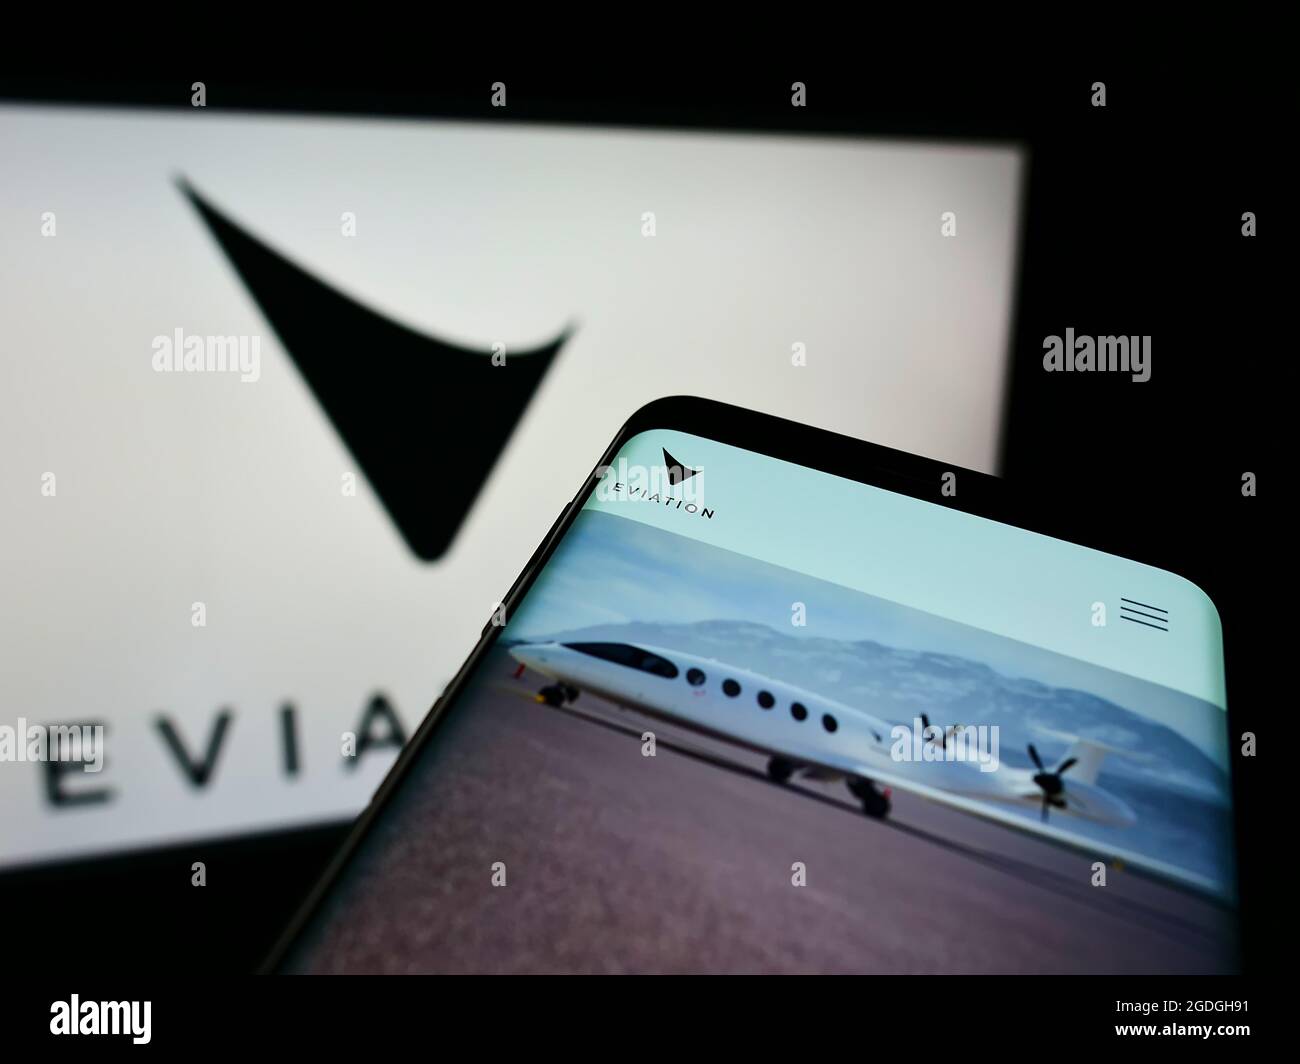 Cellphone with webpage of electric aircraft company Eviation Aircraft Ltd. on screen in front of business logo. Focus on top-left of phone display. Stock Photo